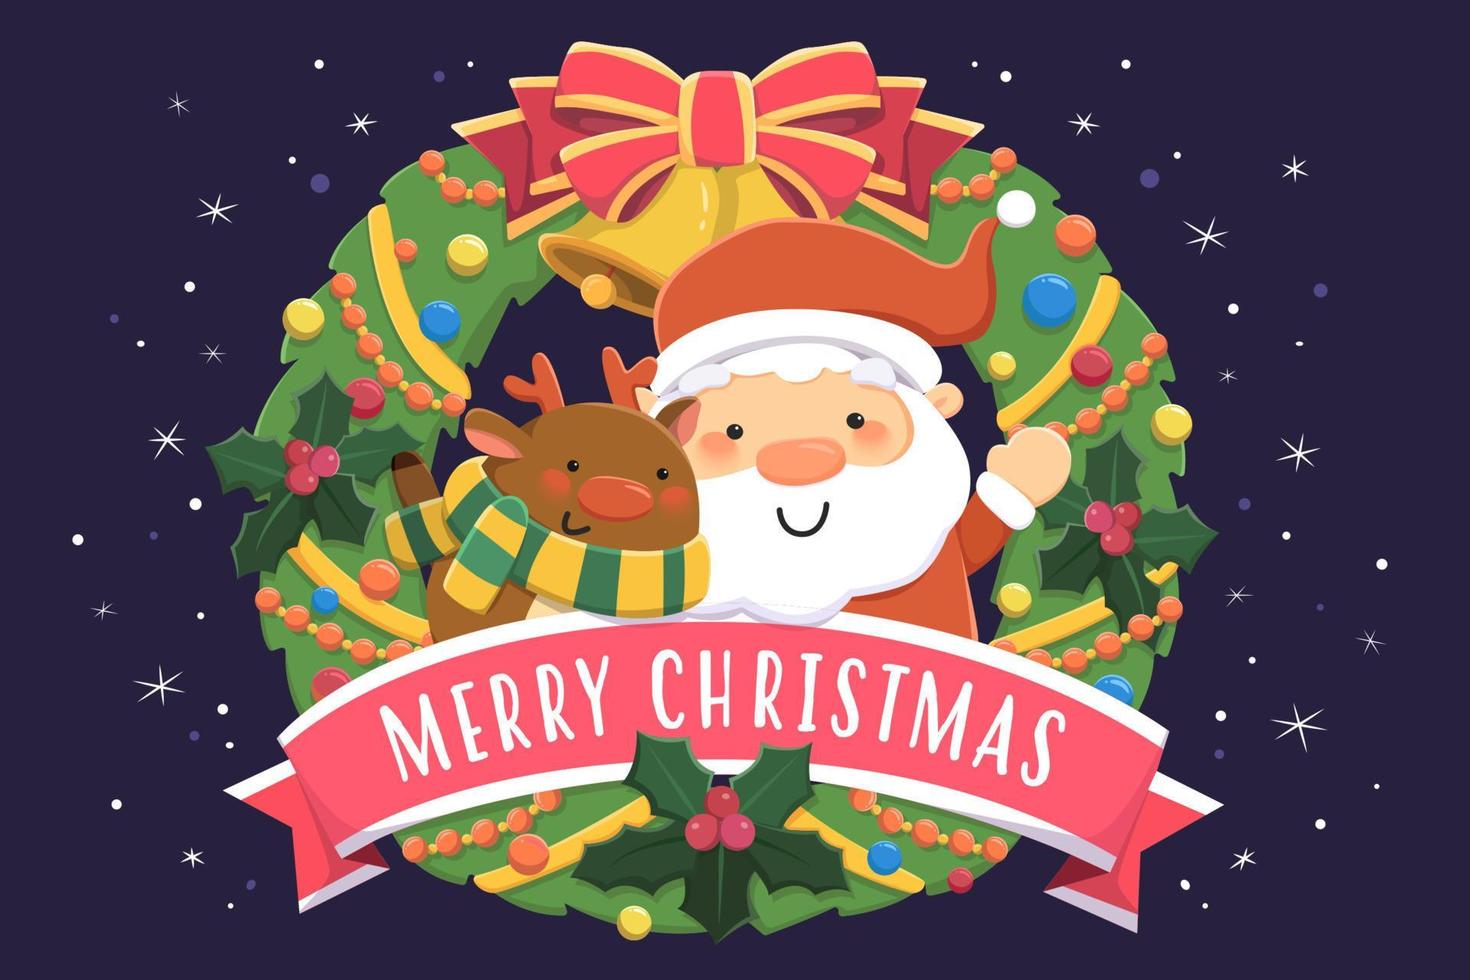 Merry Christmas card design. Flat illustration of Santa Claus and reindeer greeting from Xmas wreath on dark blue background vector